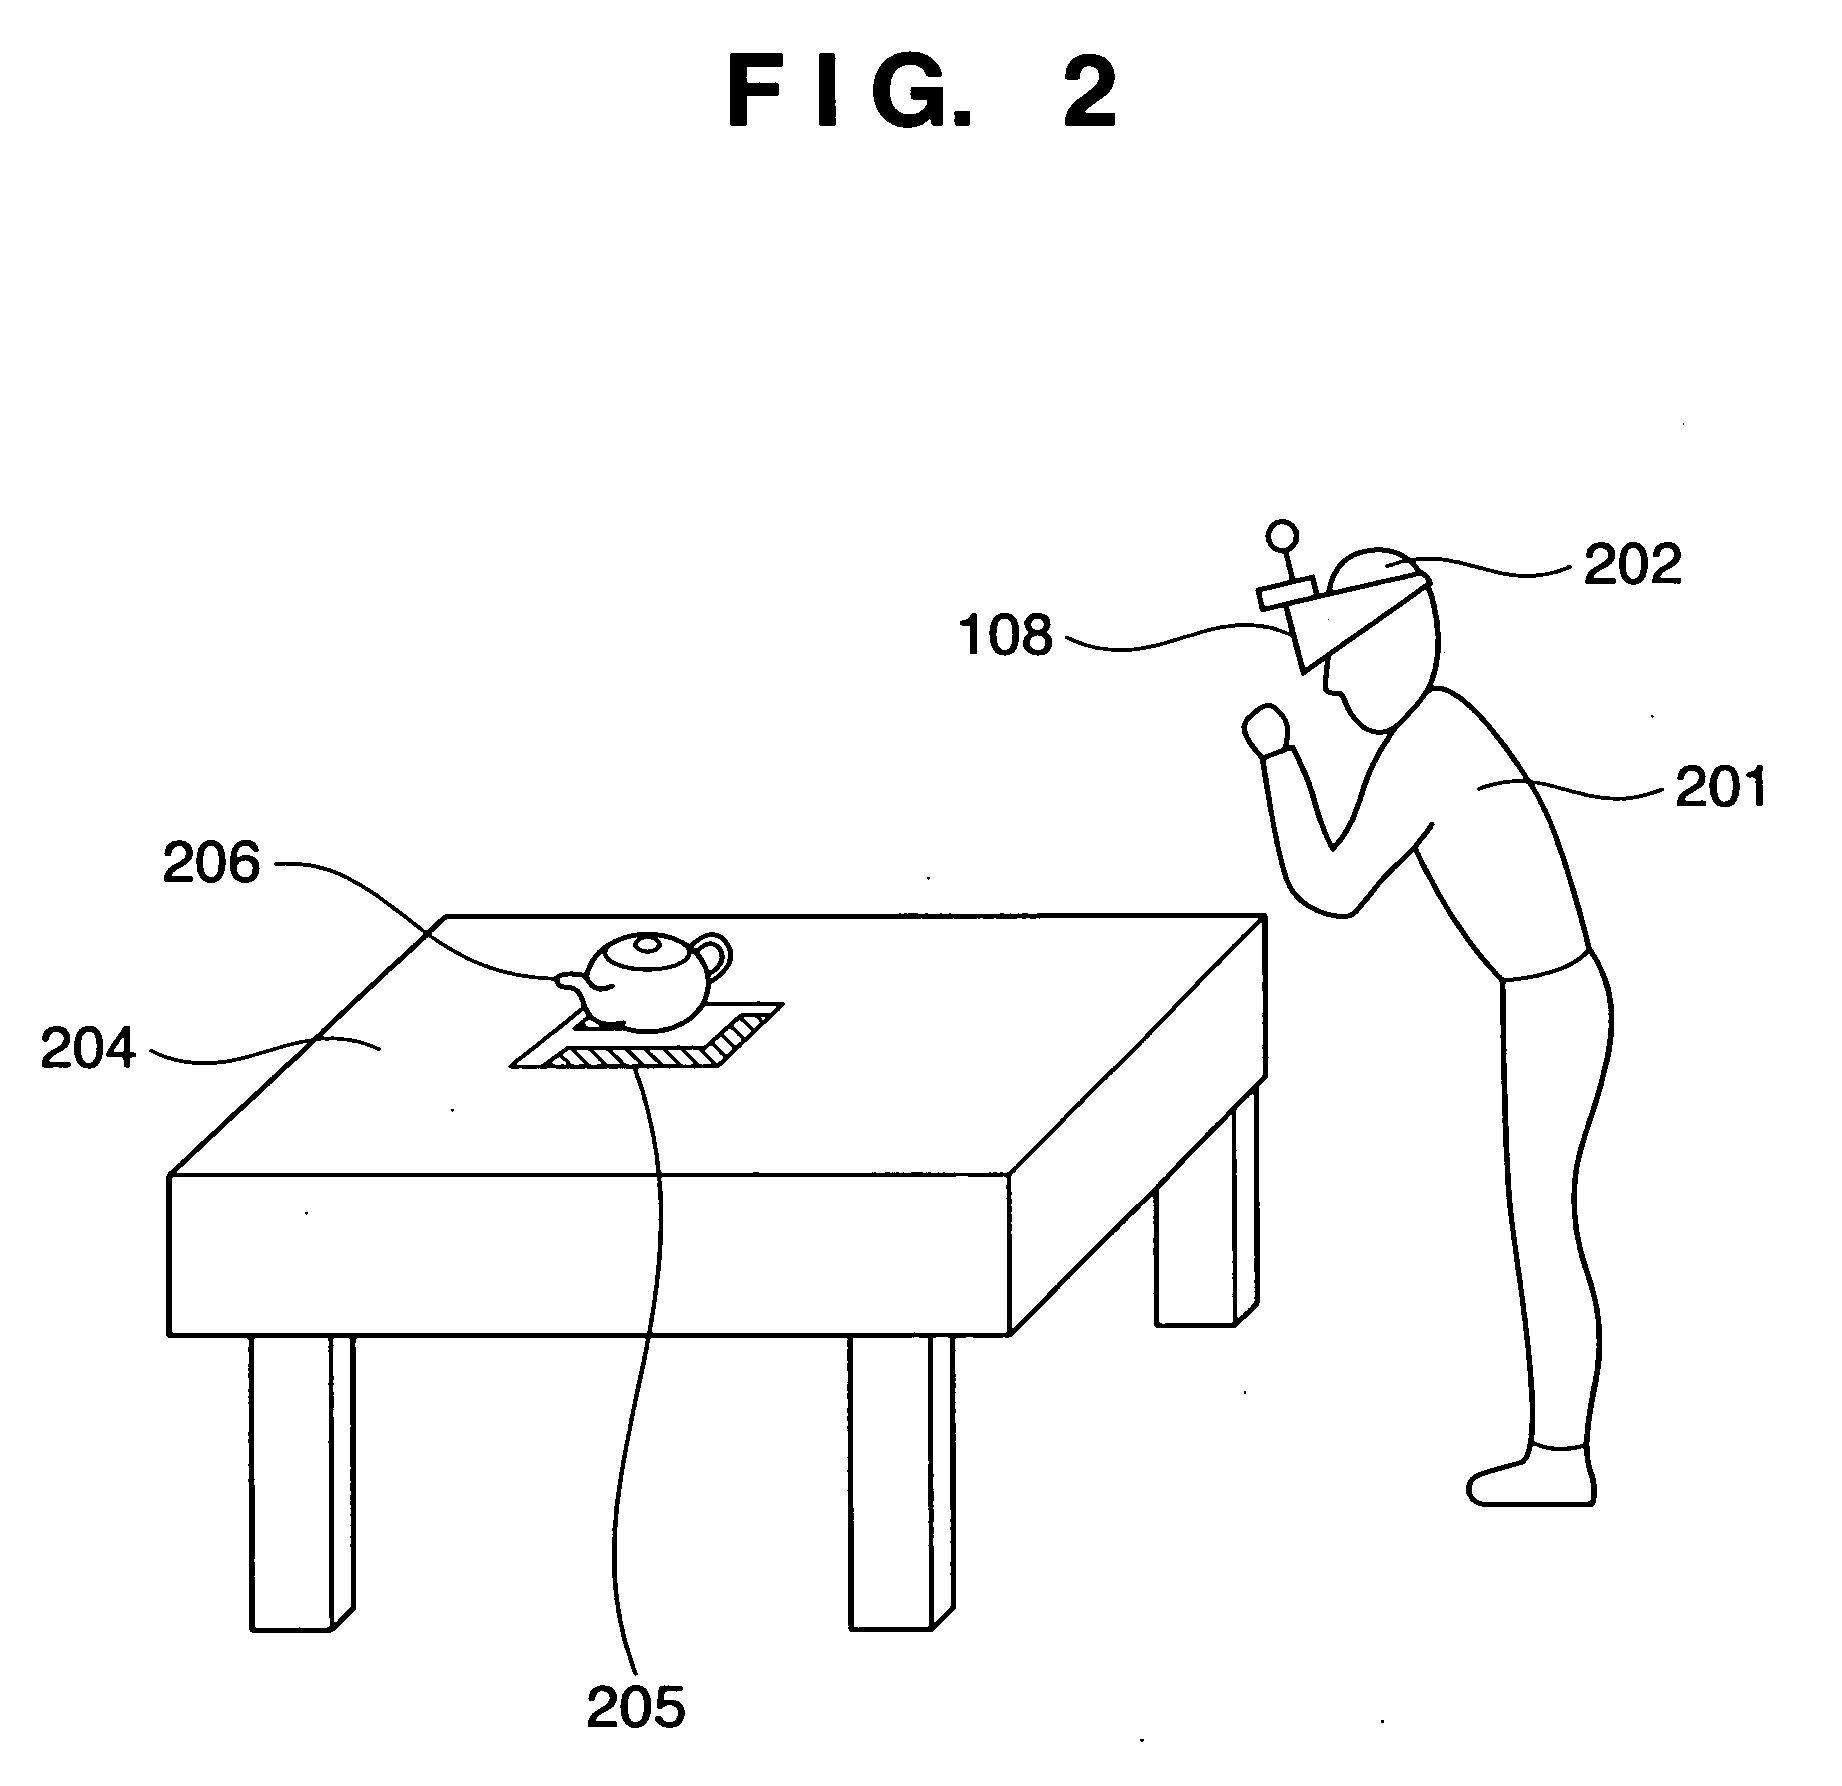 Image compositing method and apparatus